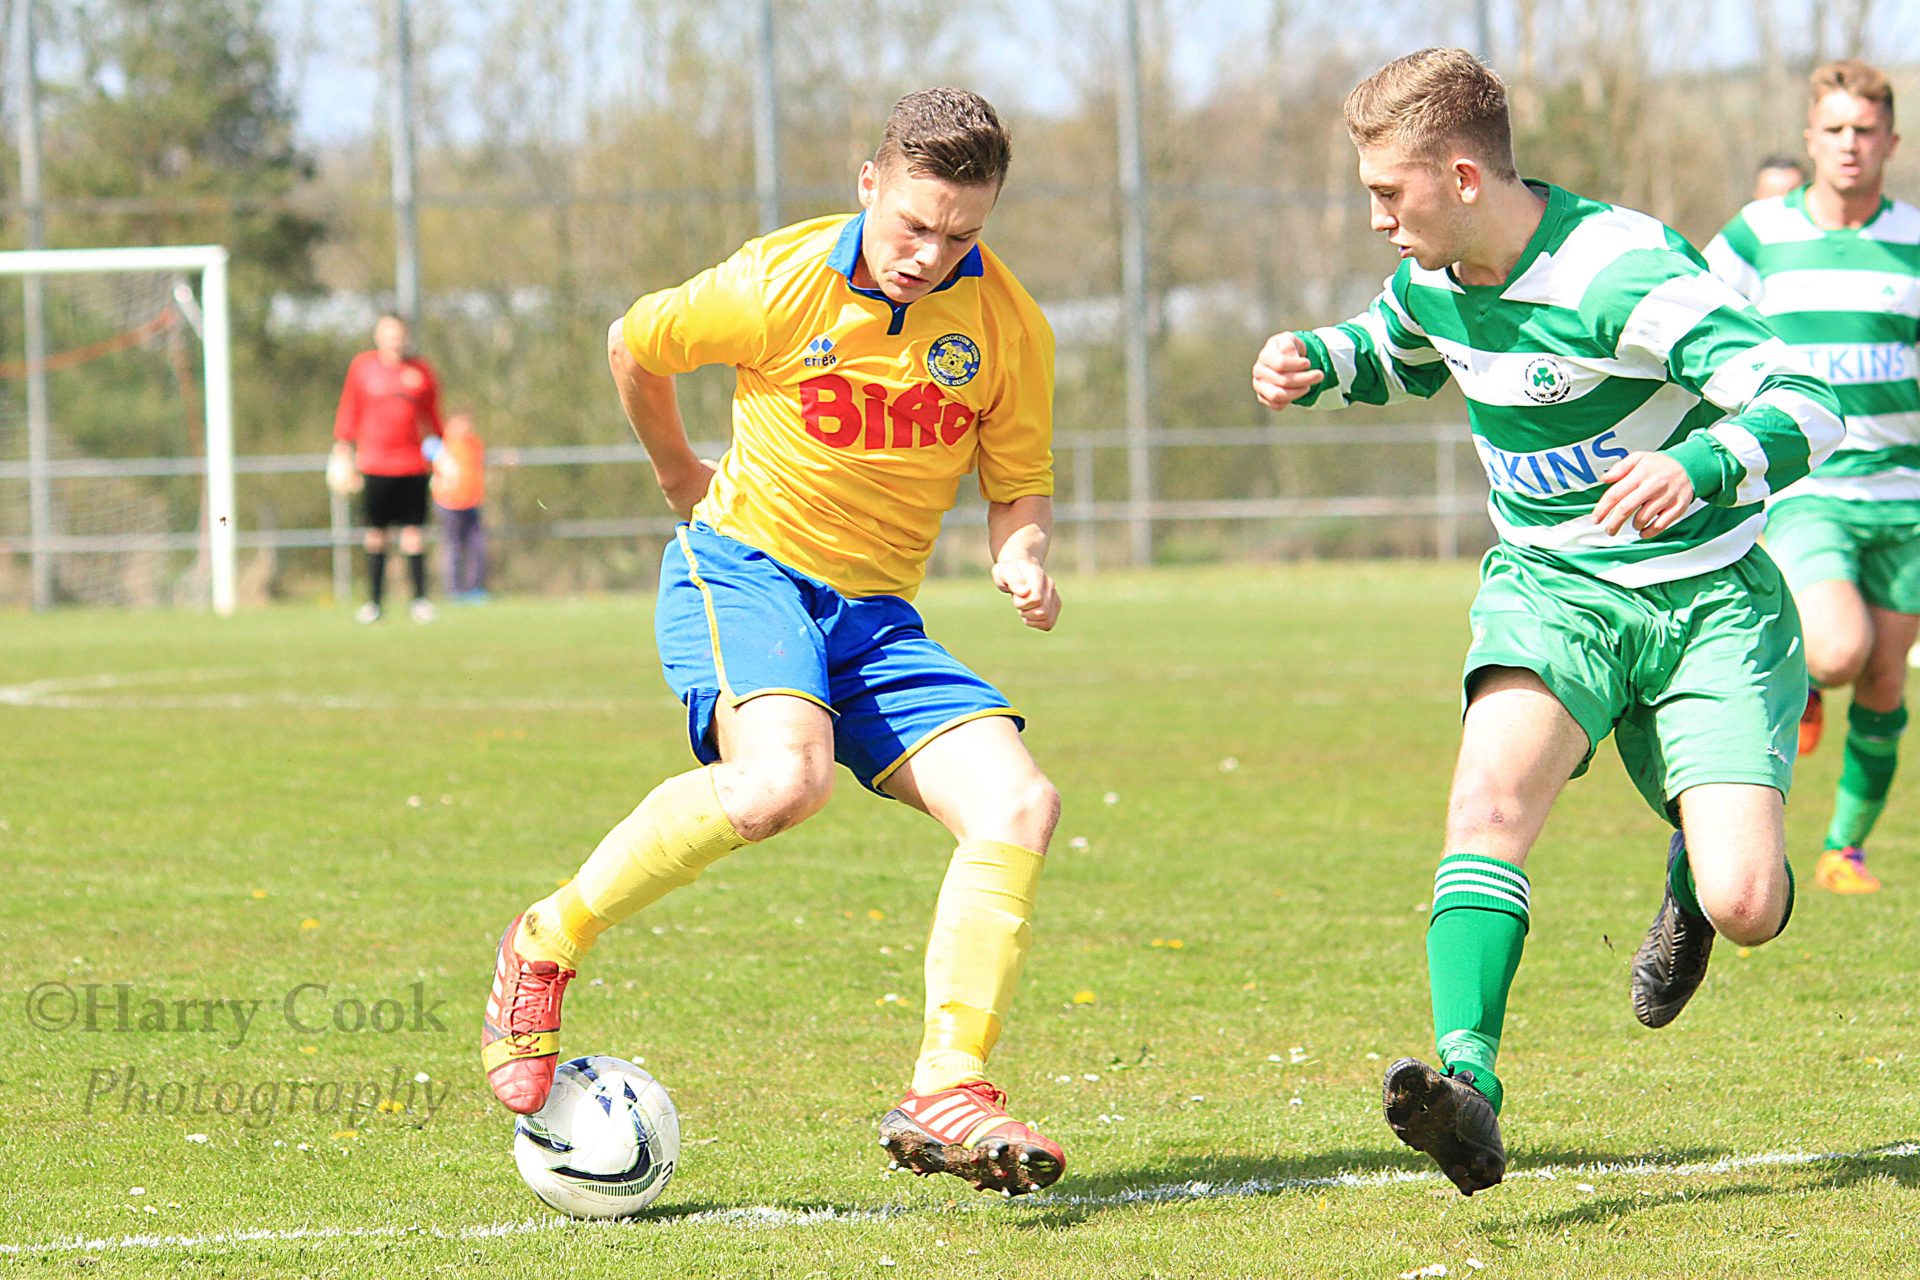 Macualy Longstaff of Stockton Town FC